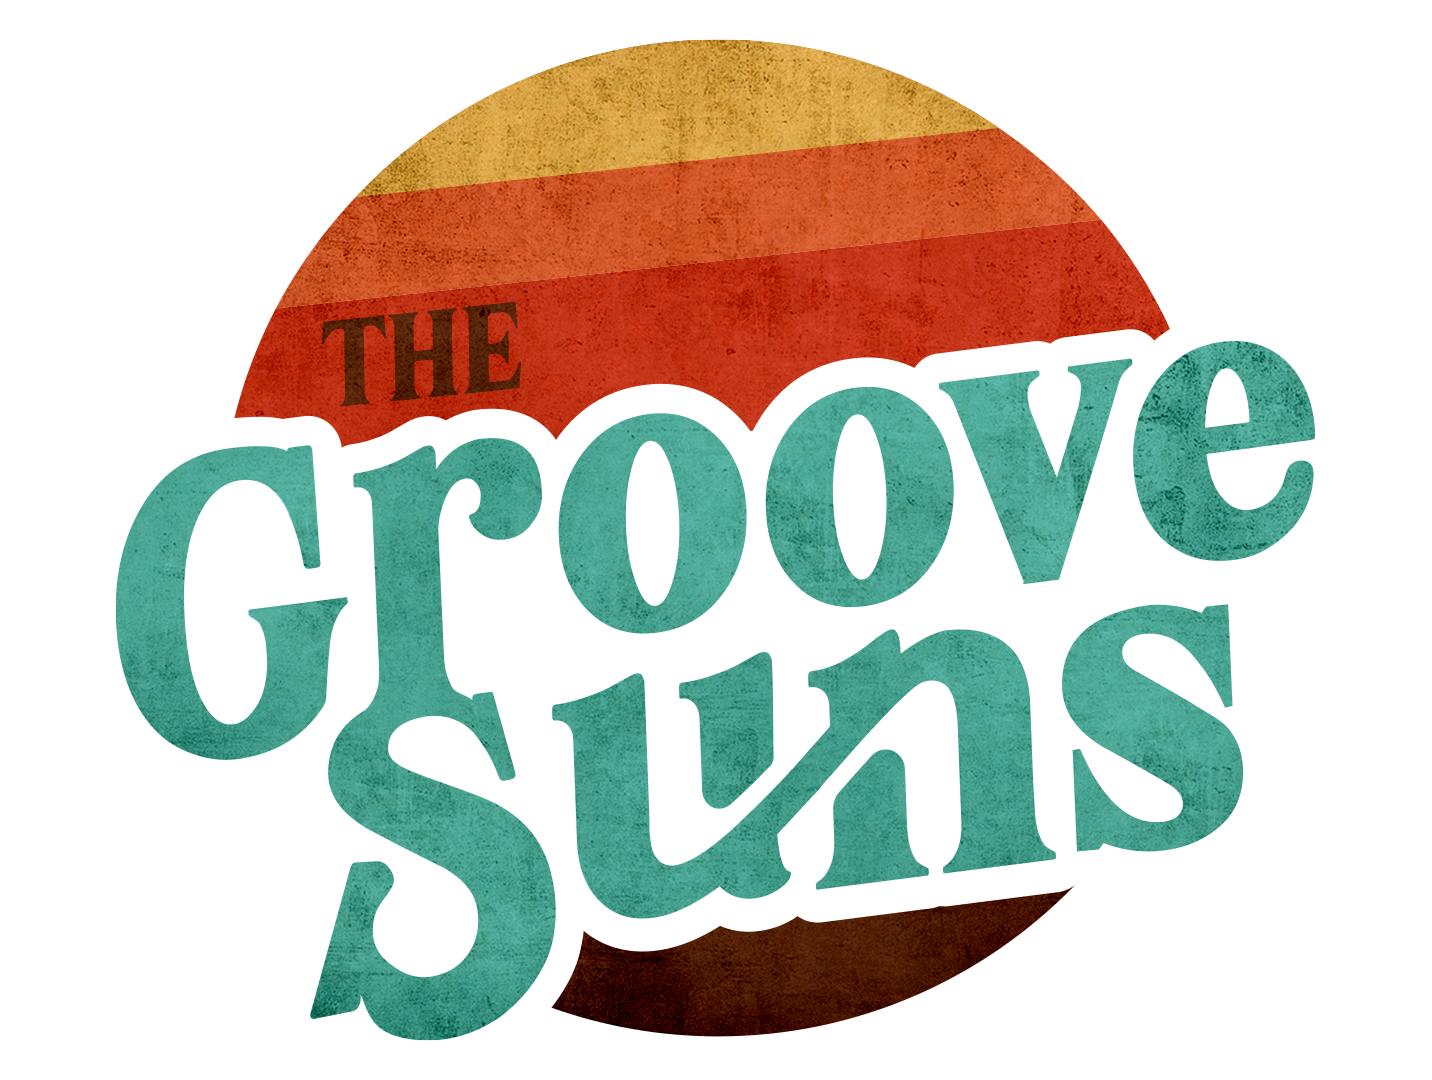 The Groove Suns